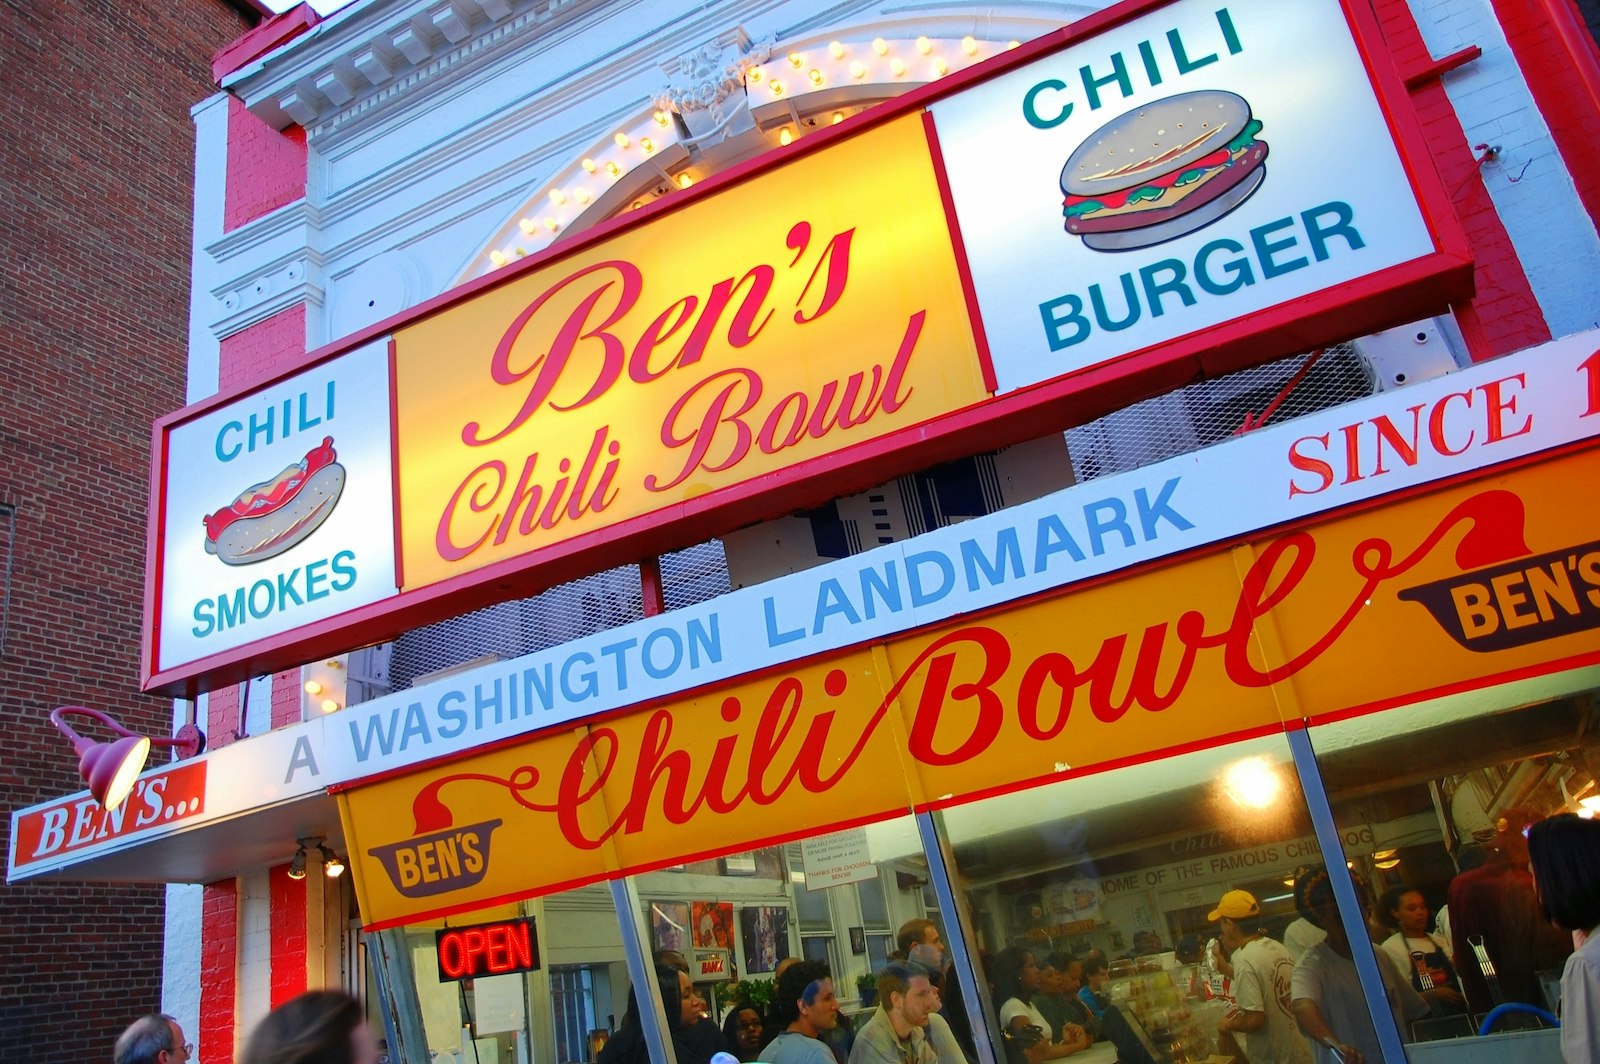 exterior shot of Ben's Chili Bowl, a diner in DC with colorful red and yellow vintage signage. Behind the glass window, the restaurant is crowded with patrons of all ages; weekend in washington, DC